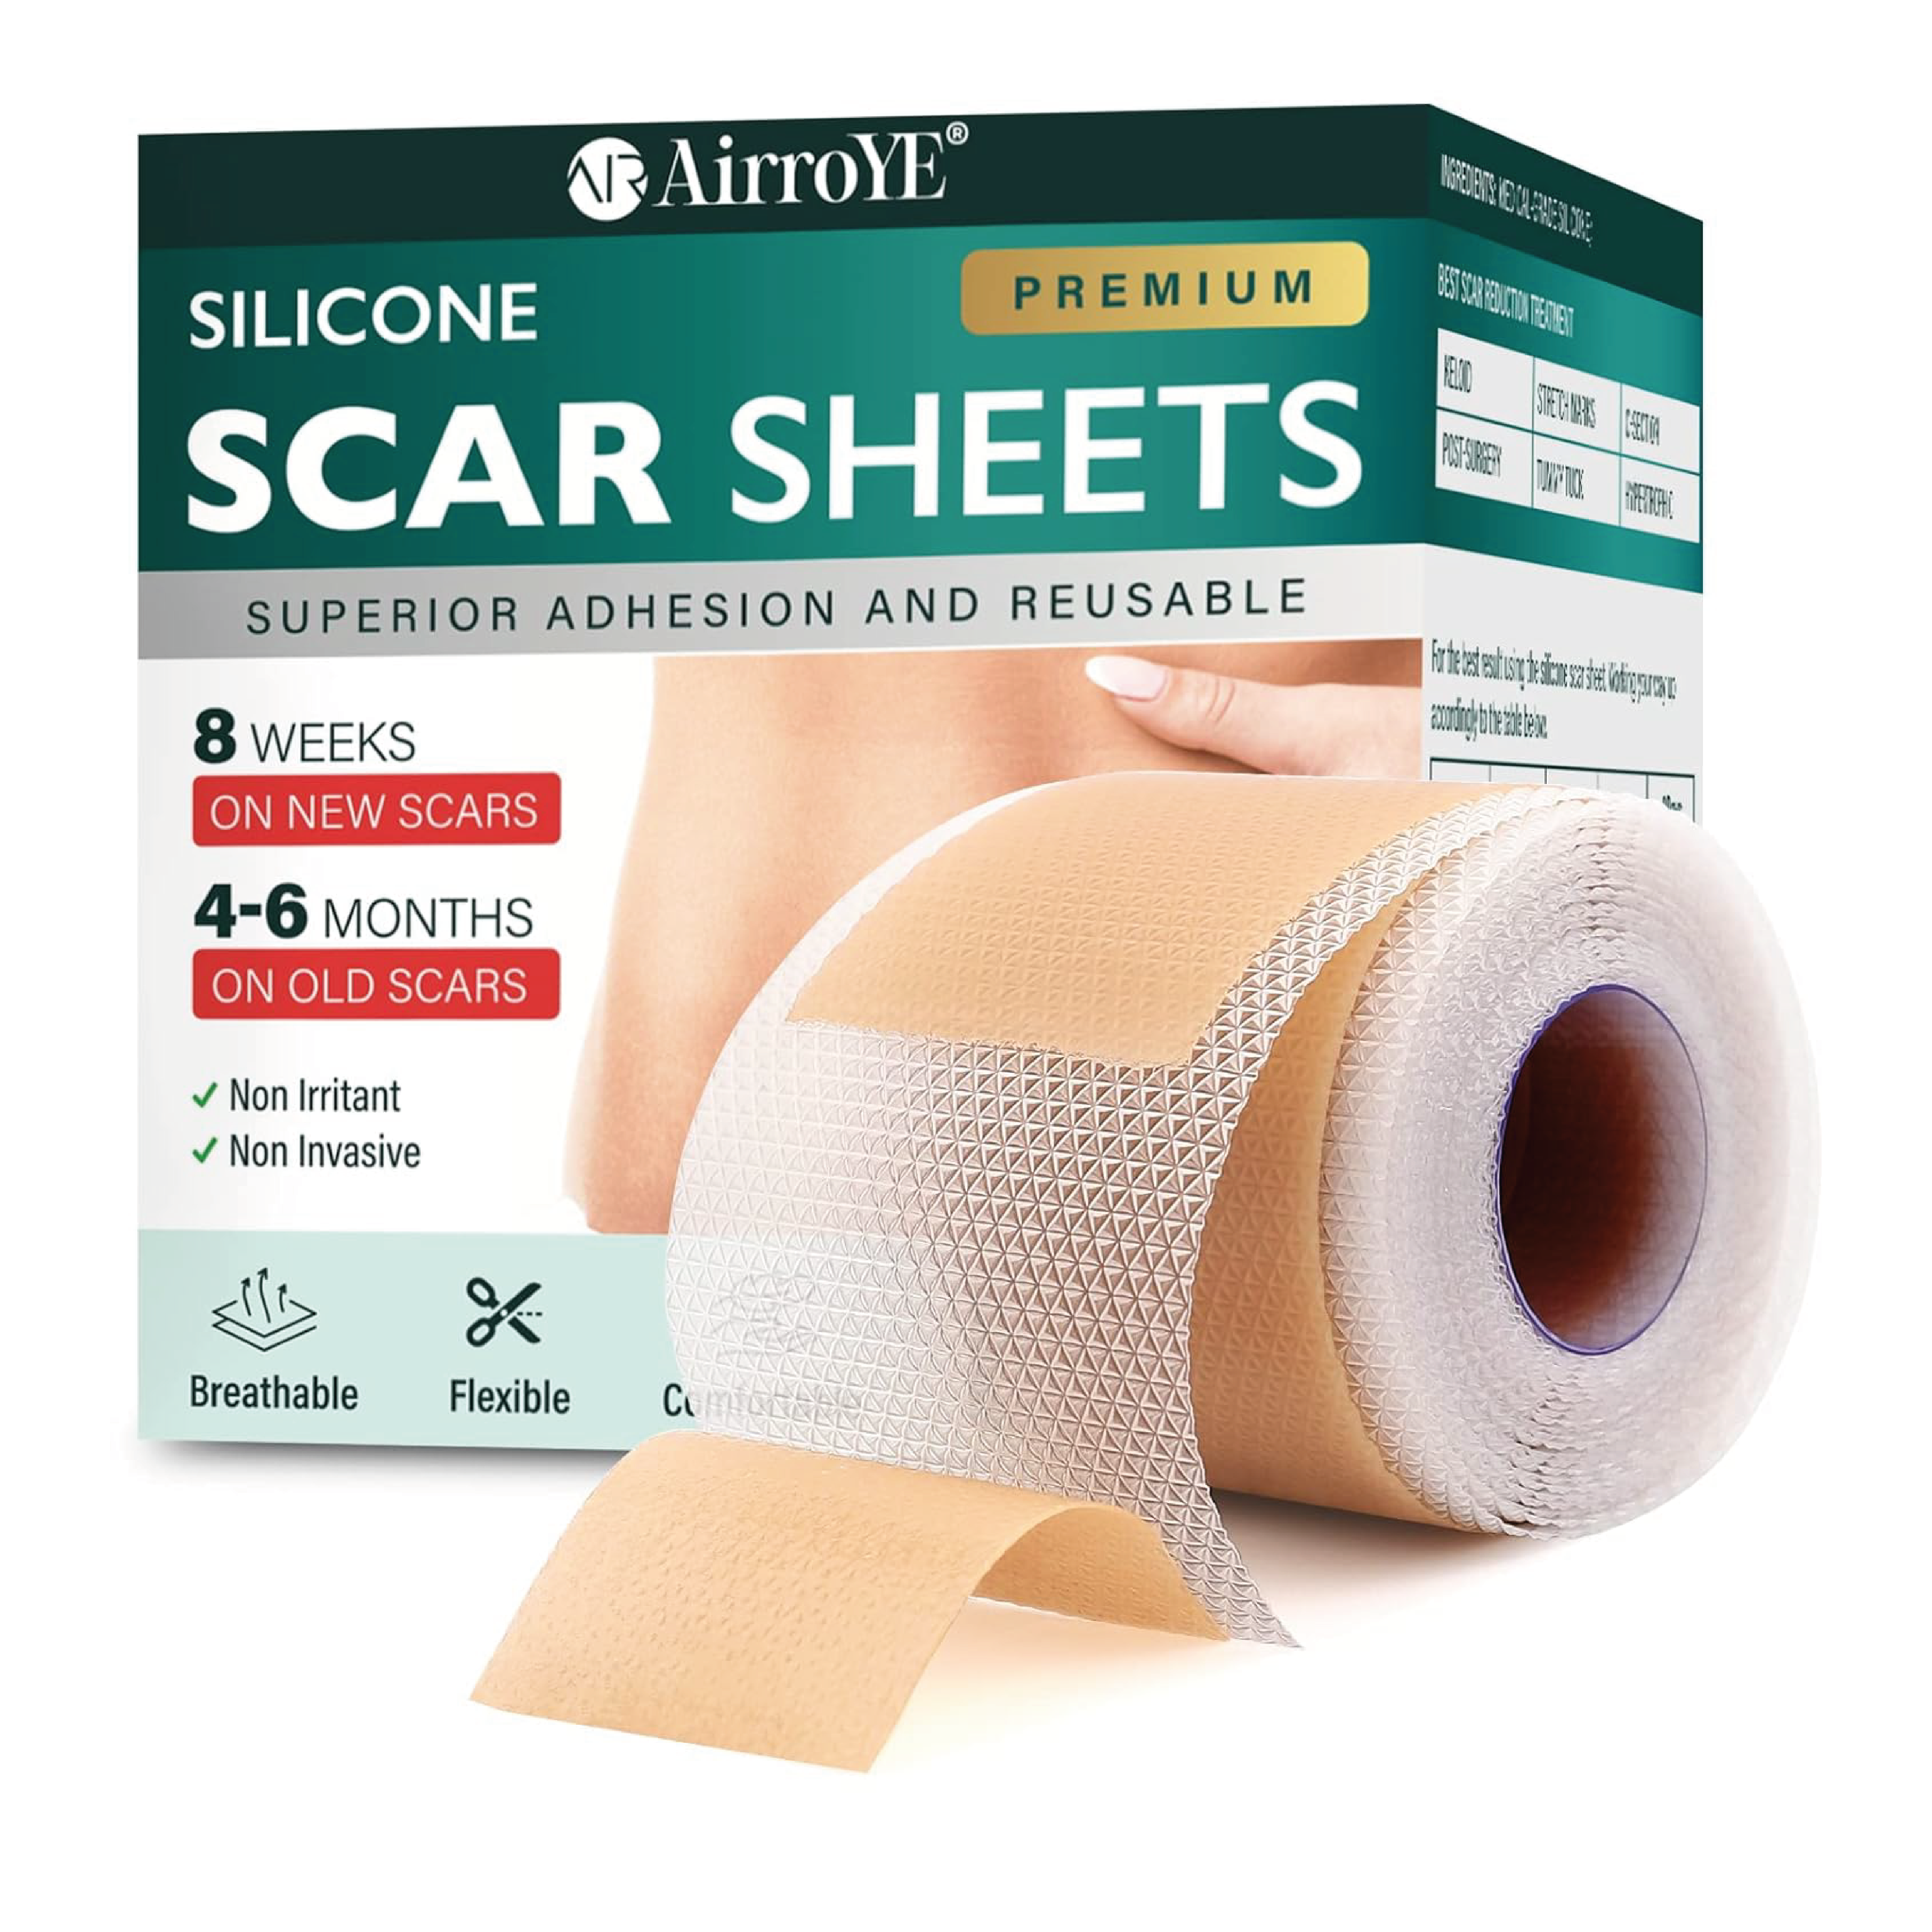 Efficiently reduce scars with our Silicone Scar Sheets. Reusable and effective, this 3M roll (1.6"x 120") is ideal for surgical scars, keloid healing, and post-procedure recovery like C-sections and tummy tucks.